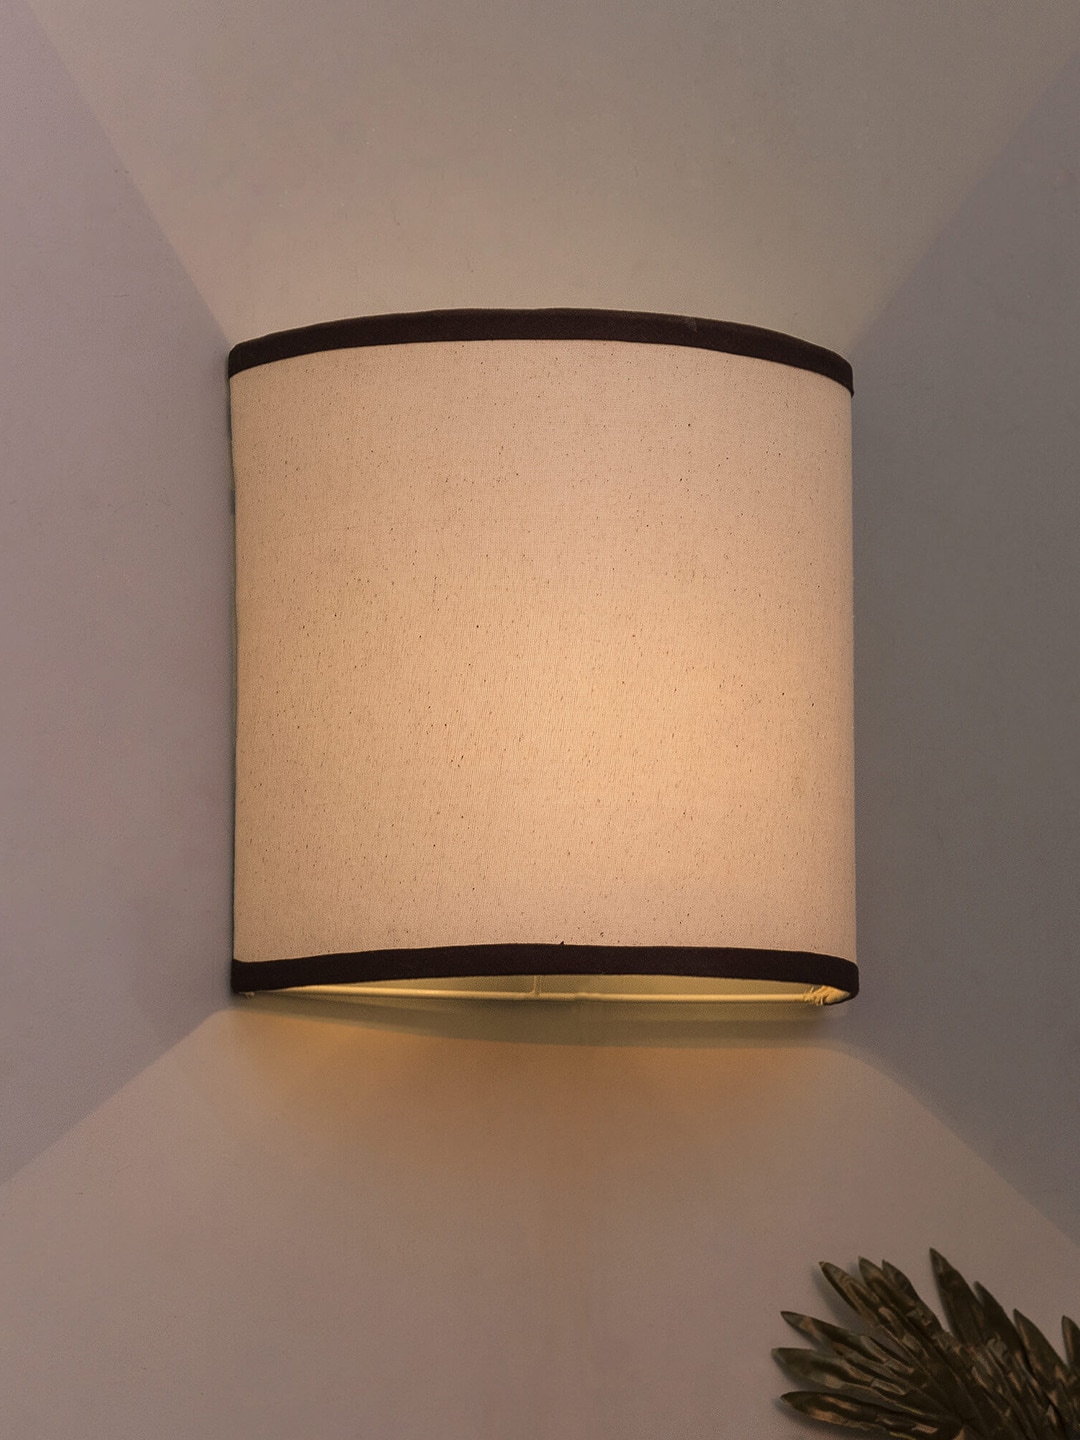 Homesake Beige Solid Wall Flush Mount Light Price in India